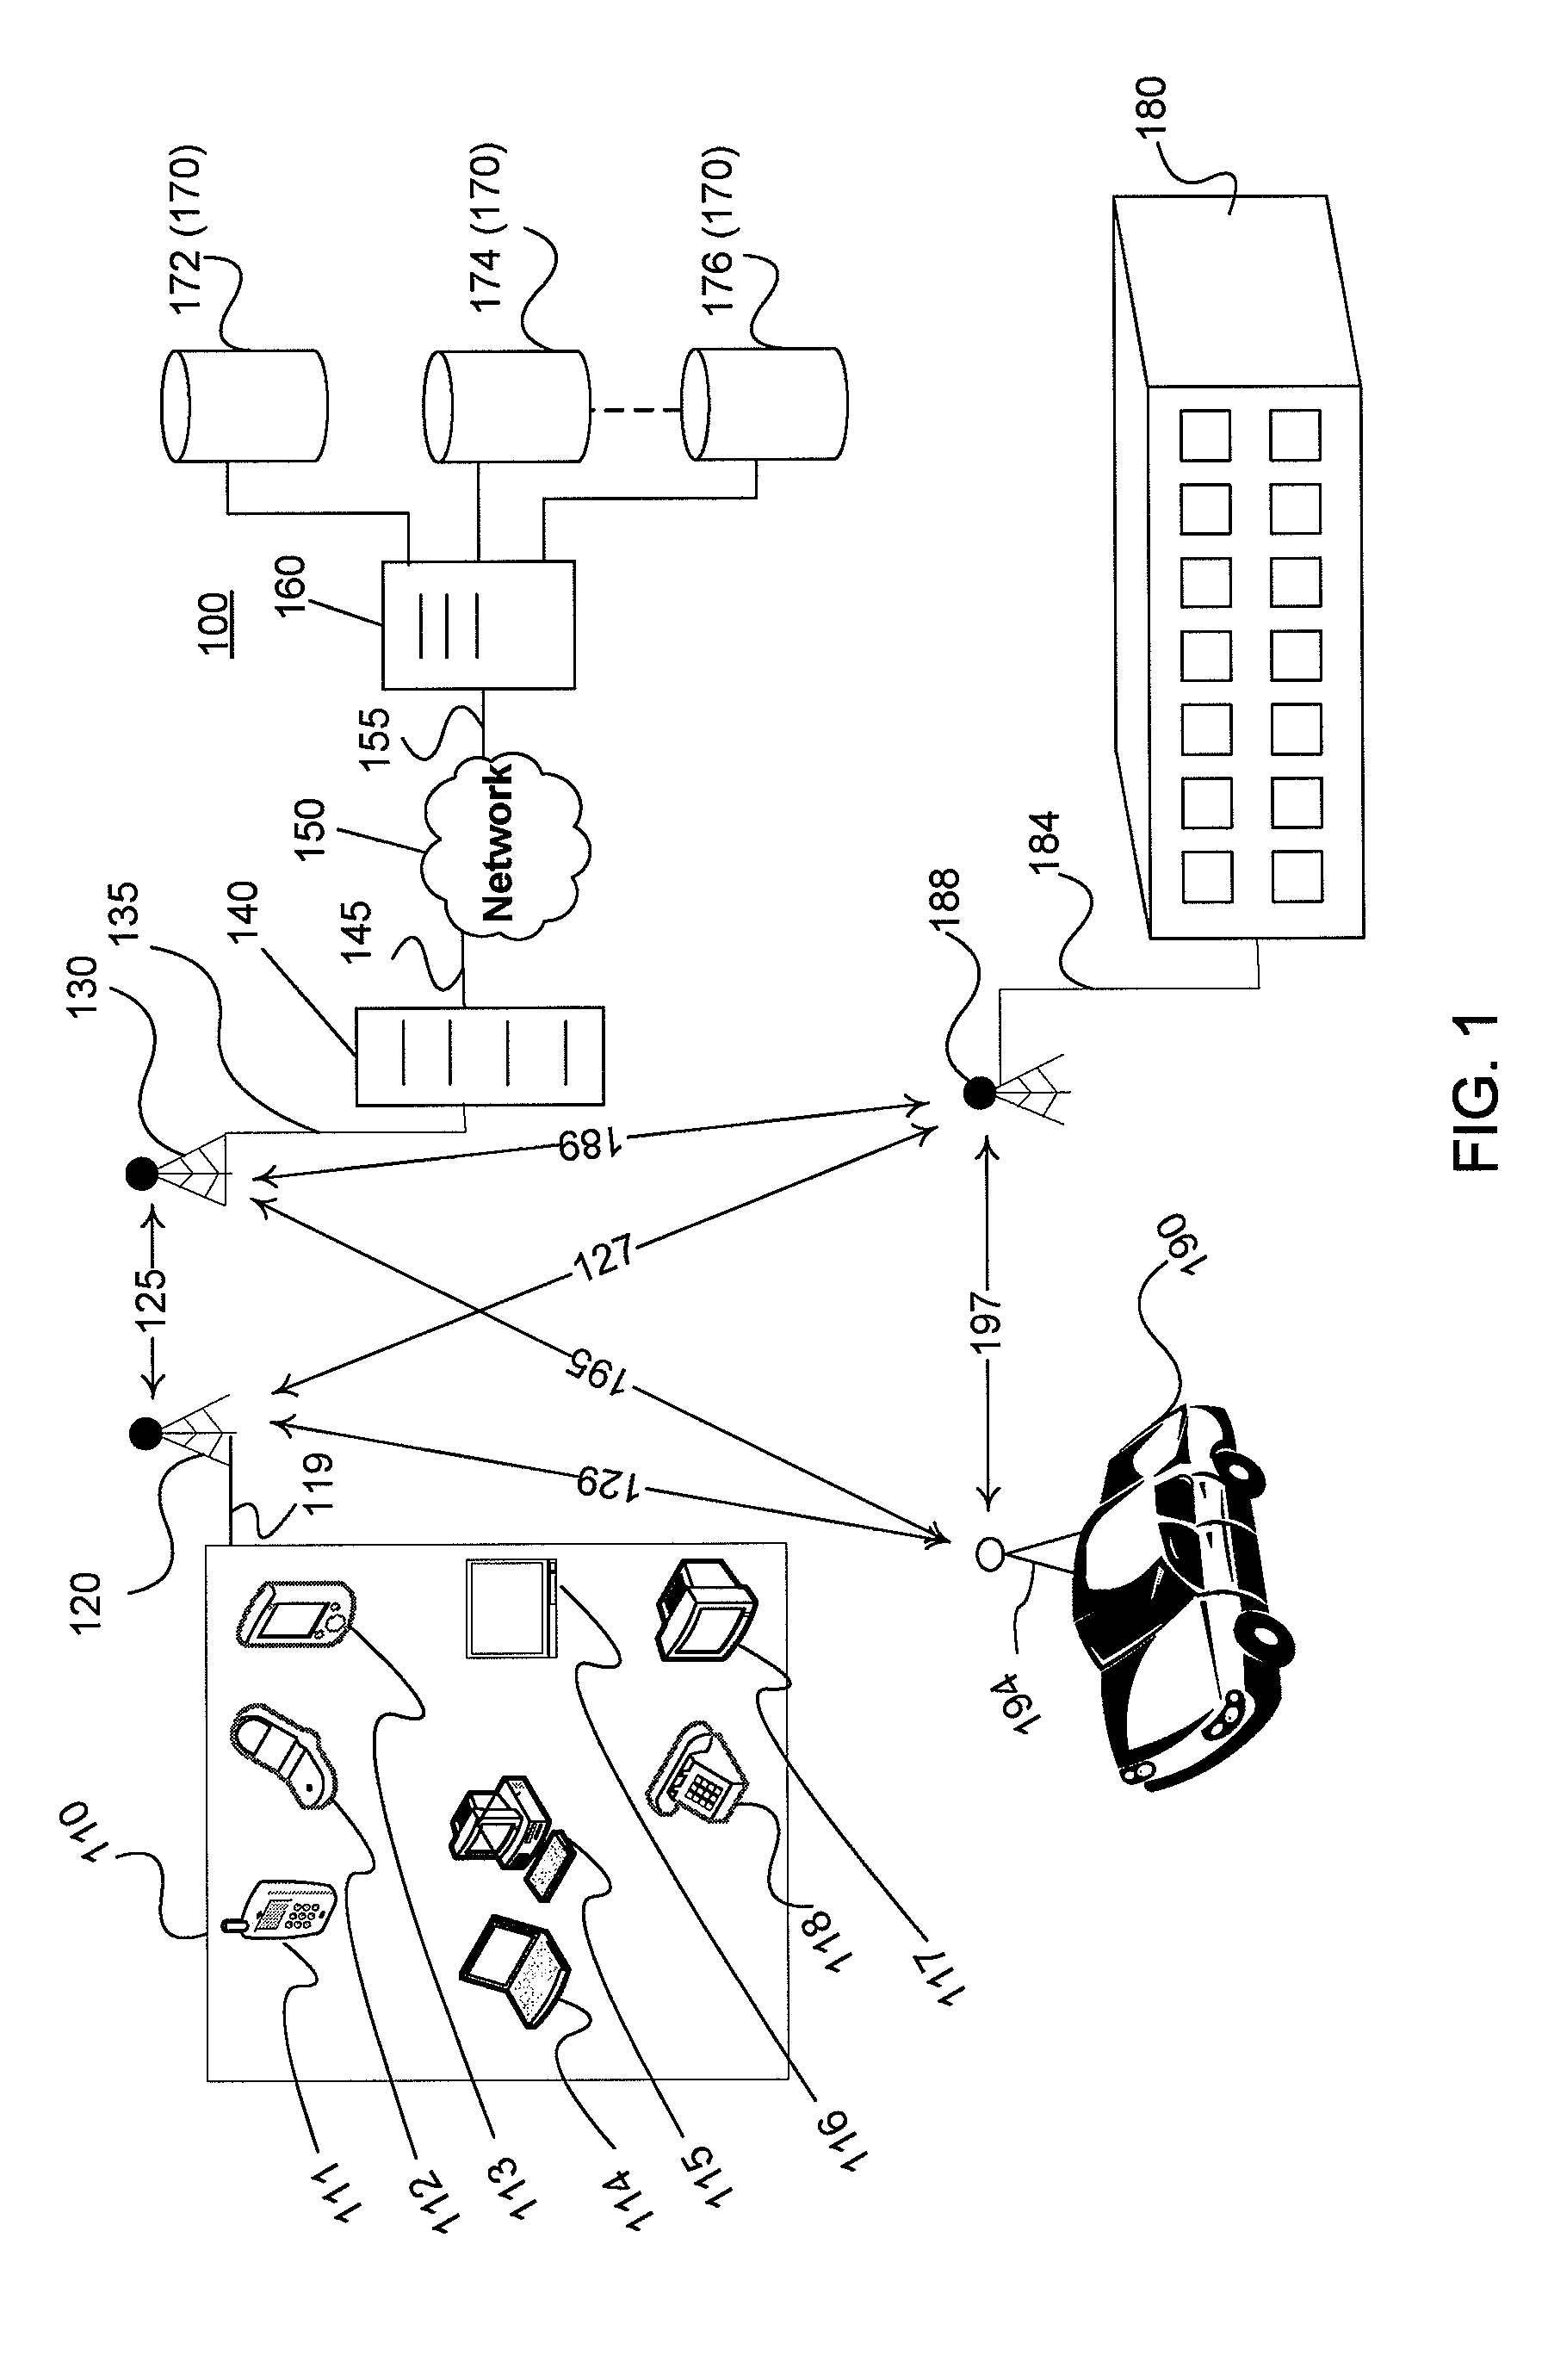 Method and system for on-demand and scheduled services relating to travel and transportation